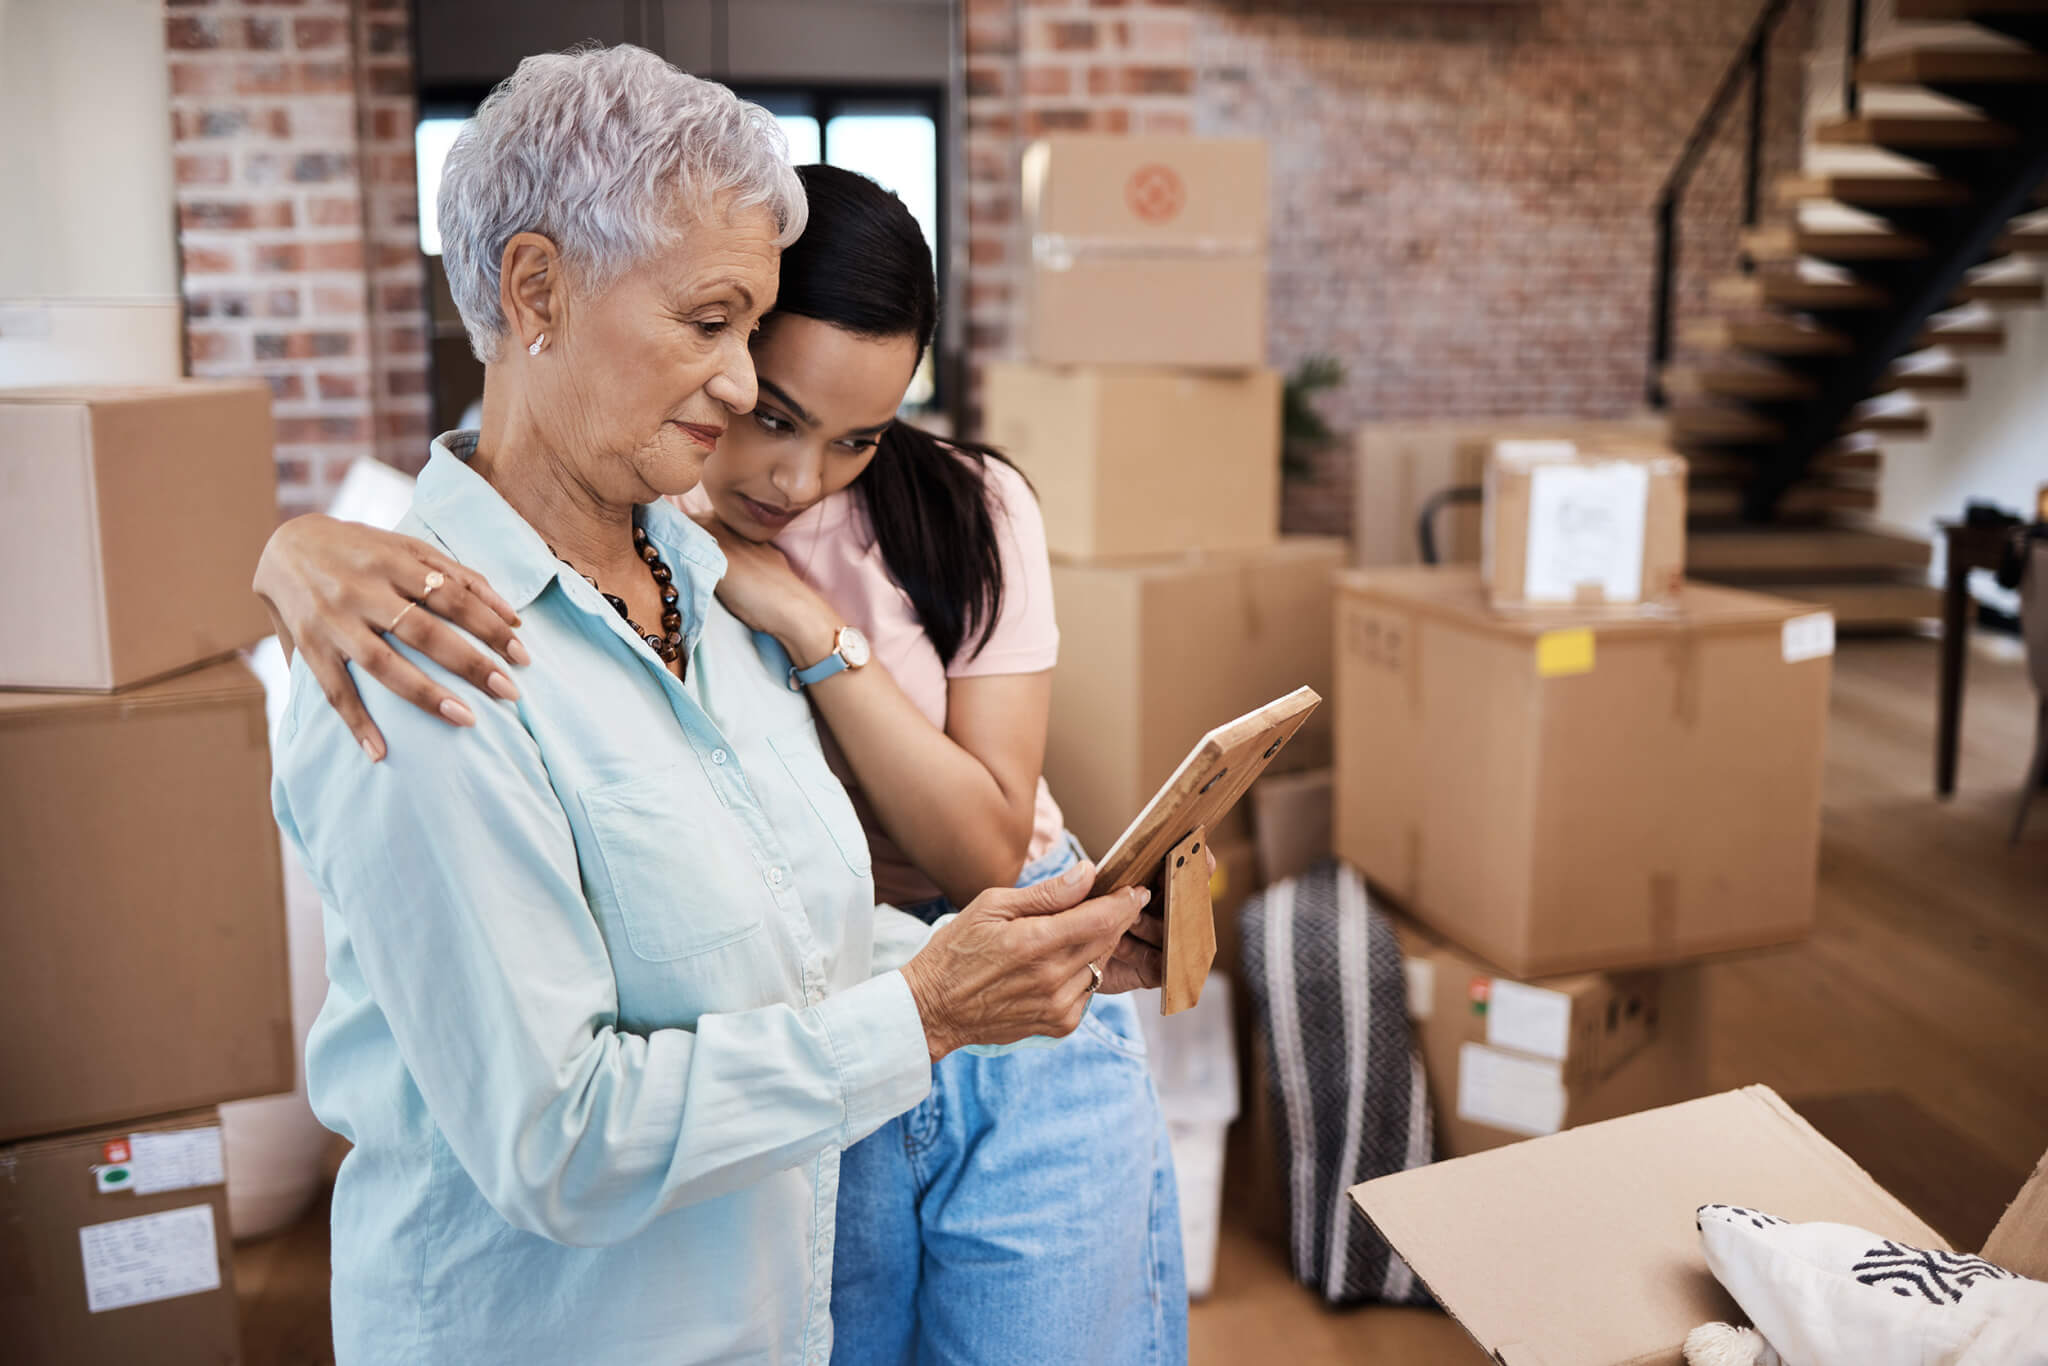 Downsizing article in SF Business Times. Olderwoman with younger woman resting head on shoulder with moving boxes in background.